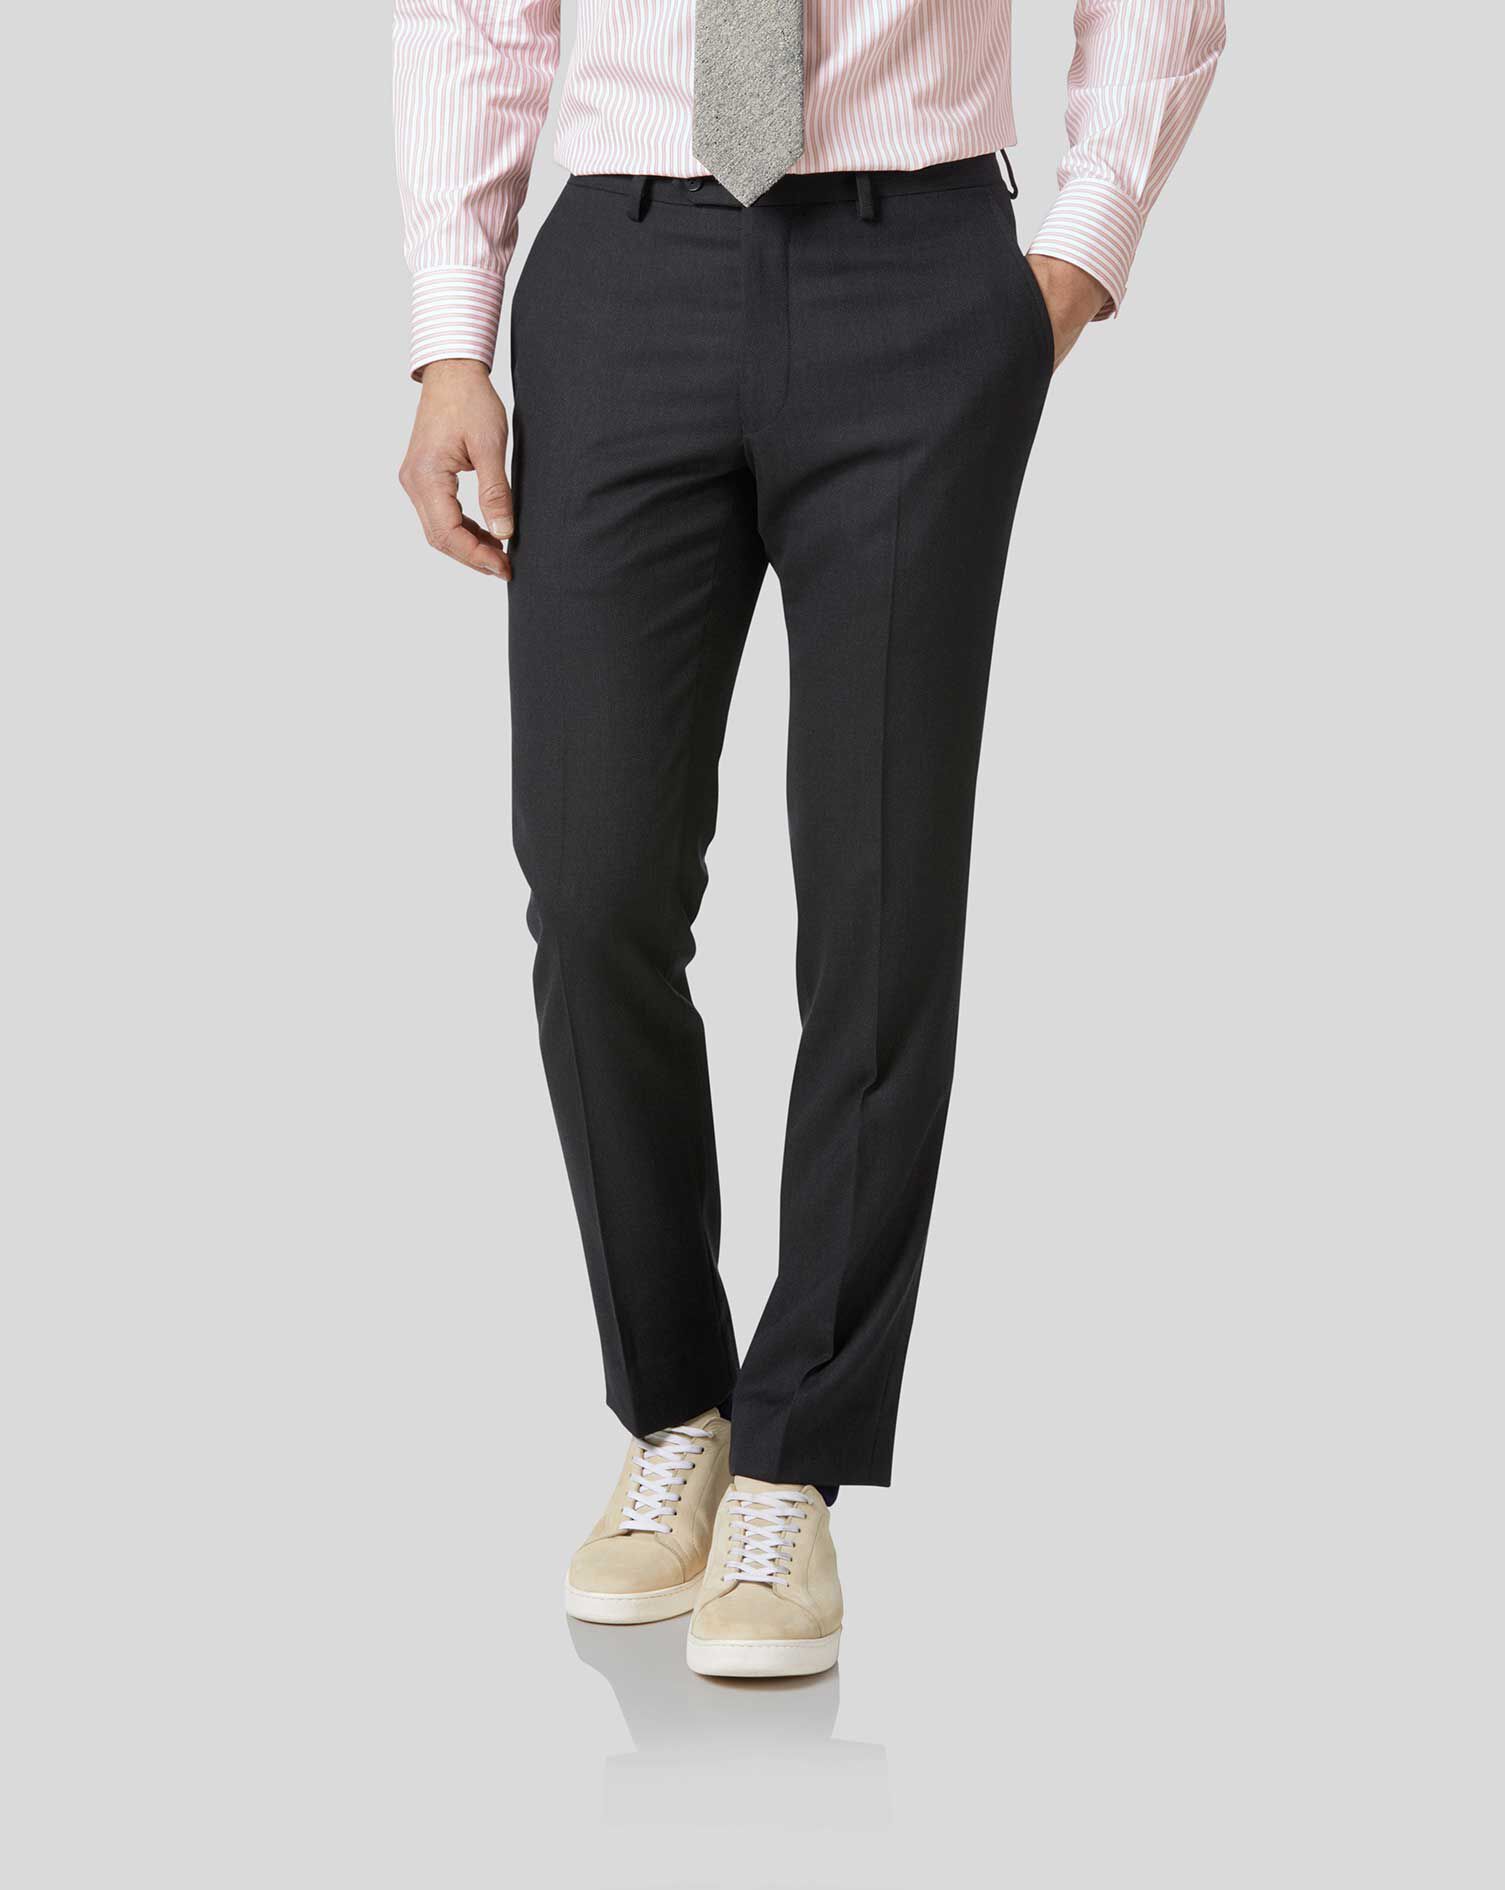 Charles V\u00f6gele Suit Trouser black striped pattern business style Fashion Suits Suit Trousers Charles Vögele 